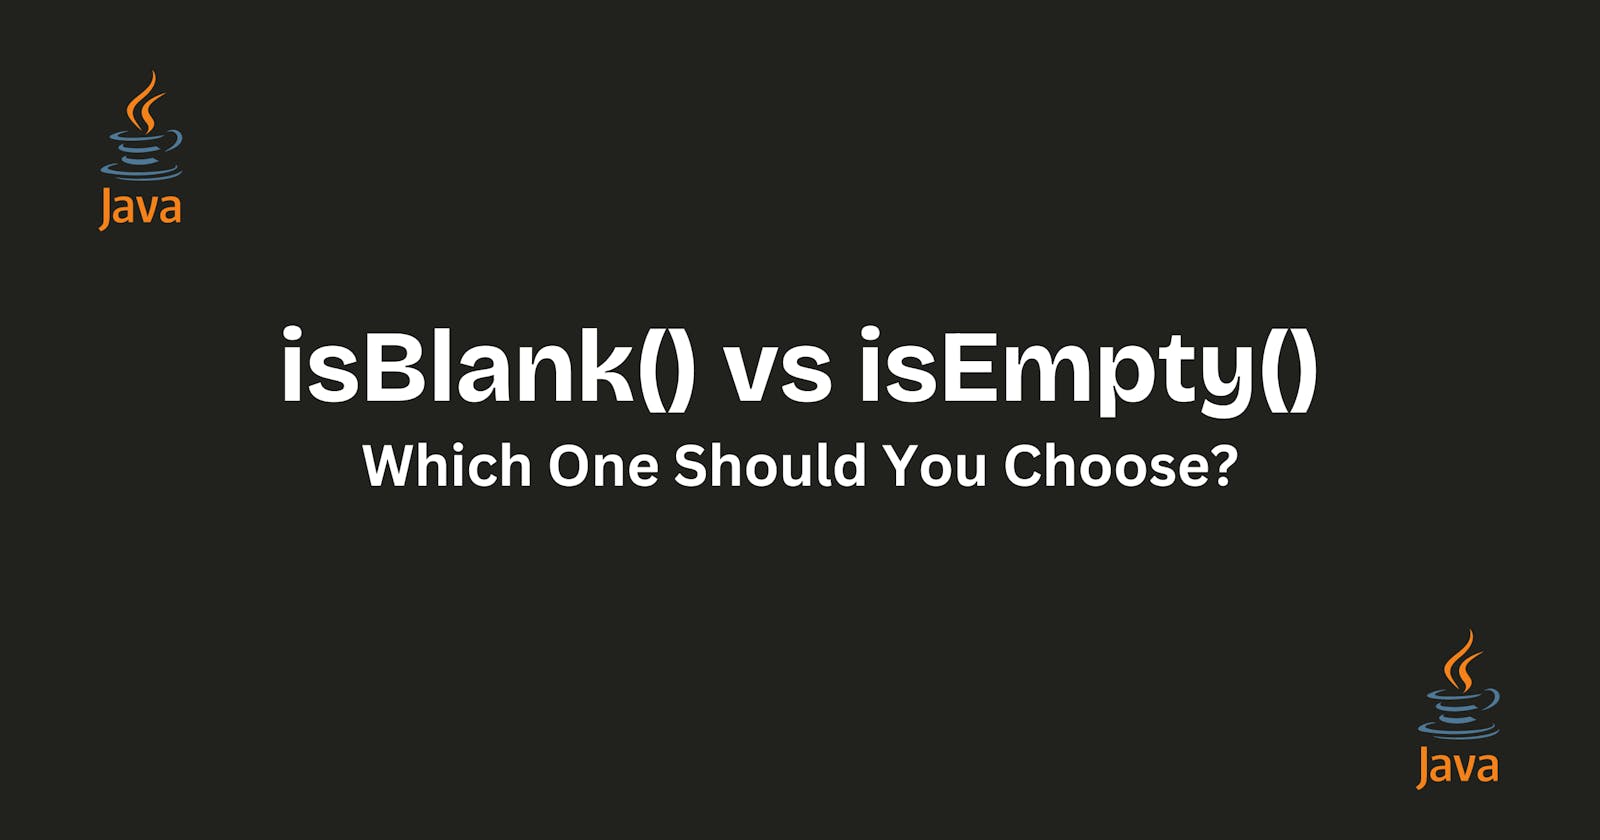 "isBlank() vs. isEmpty() – Which One Should You Choose?"